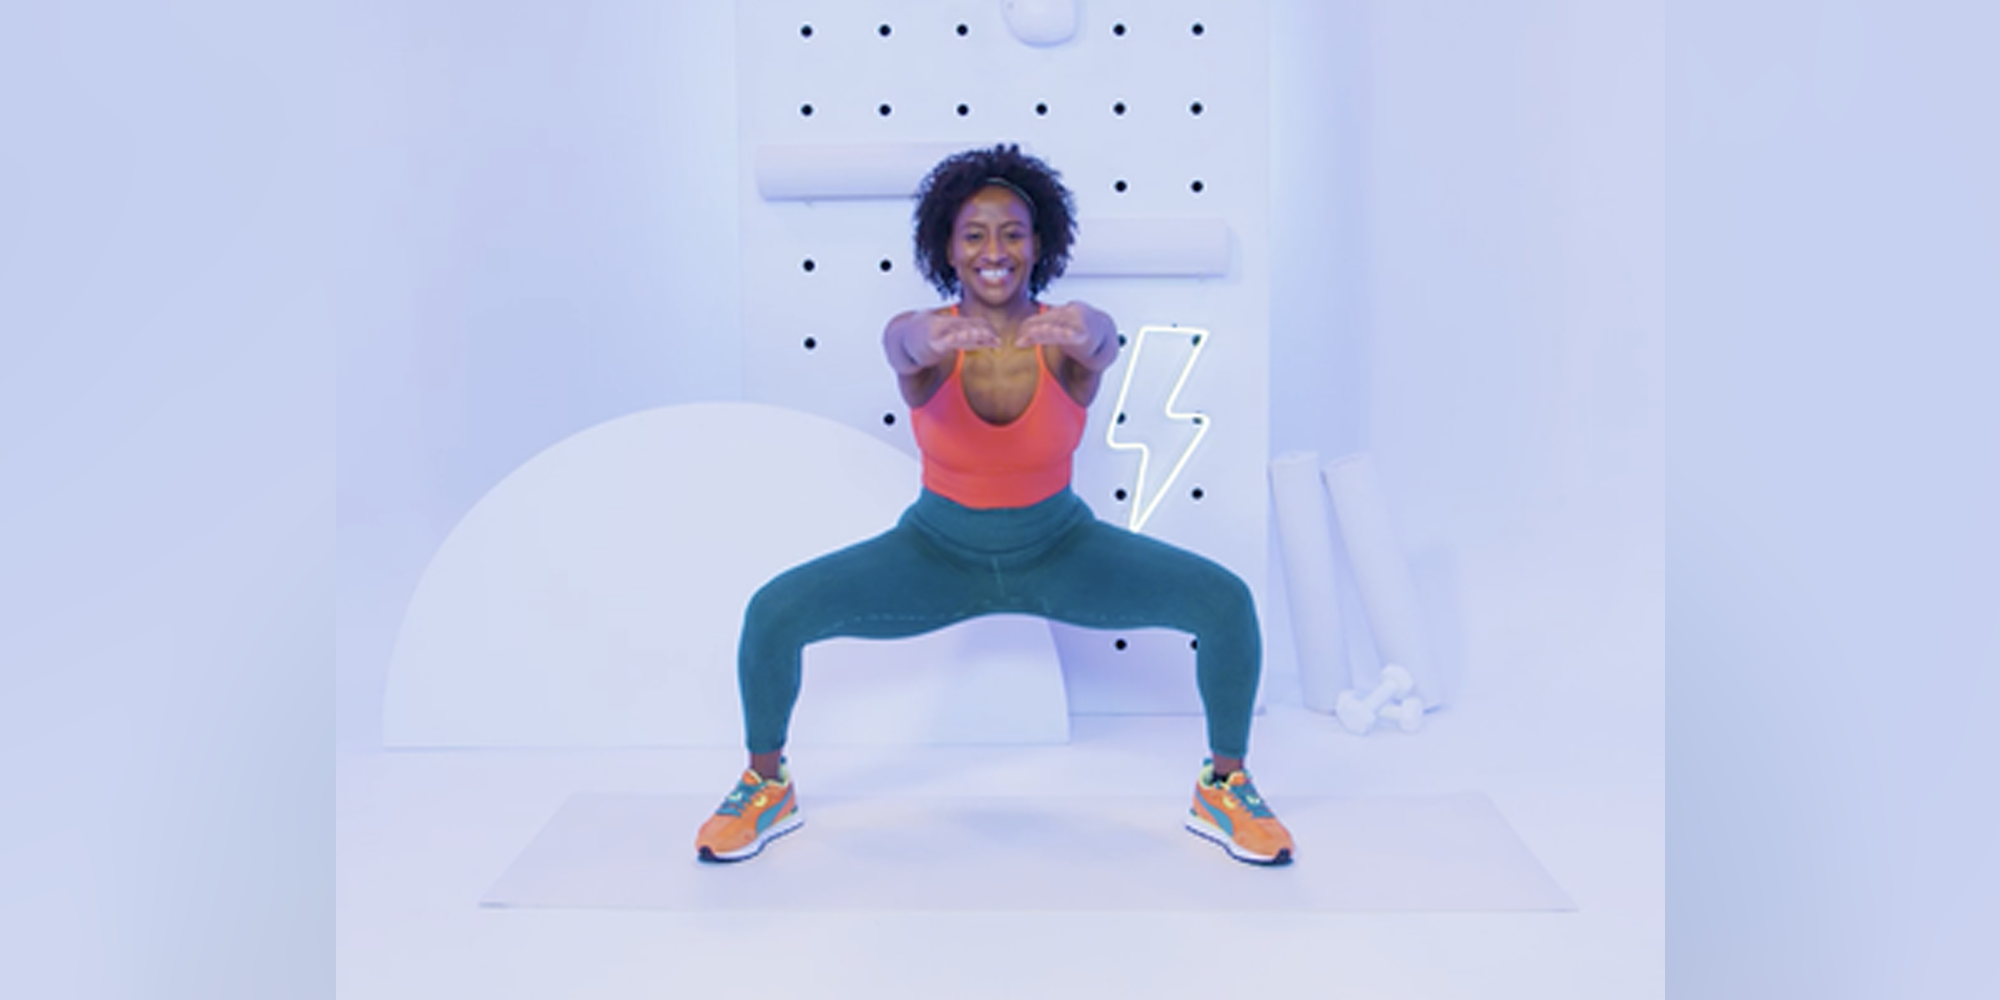 This workout move could help save your heart